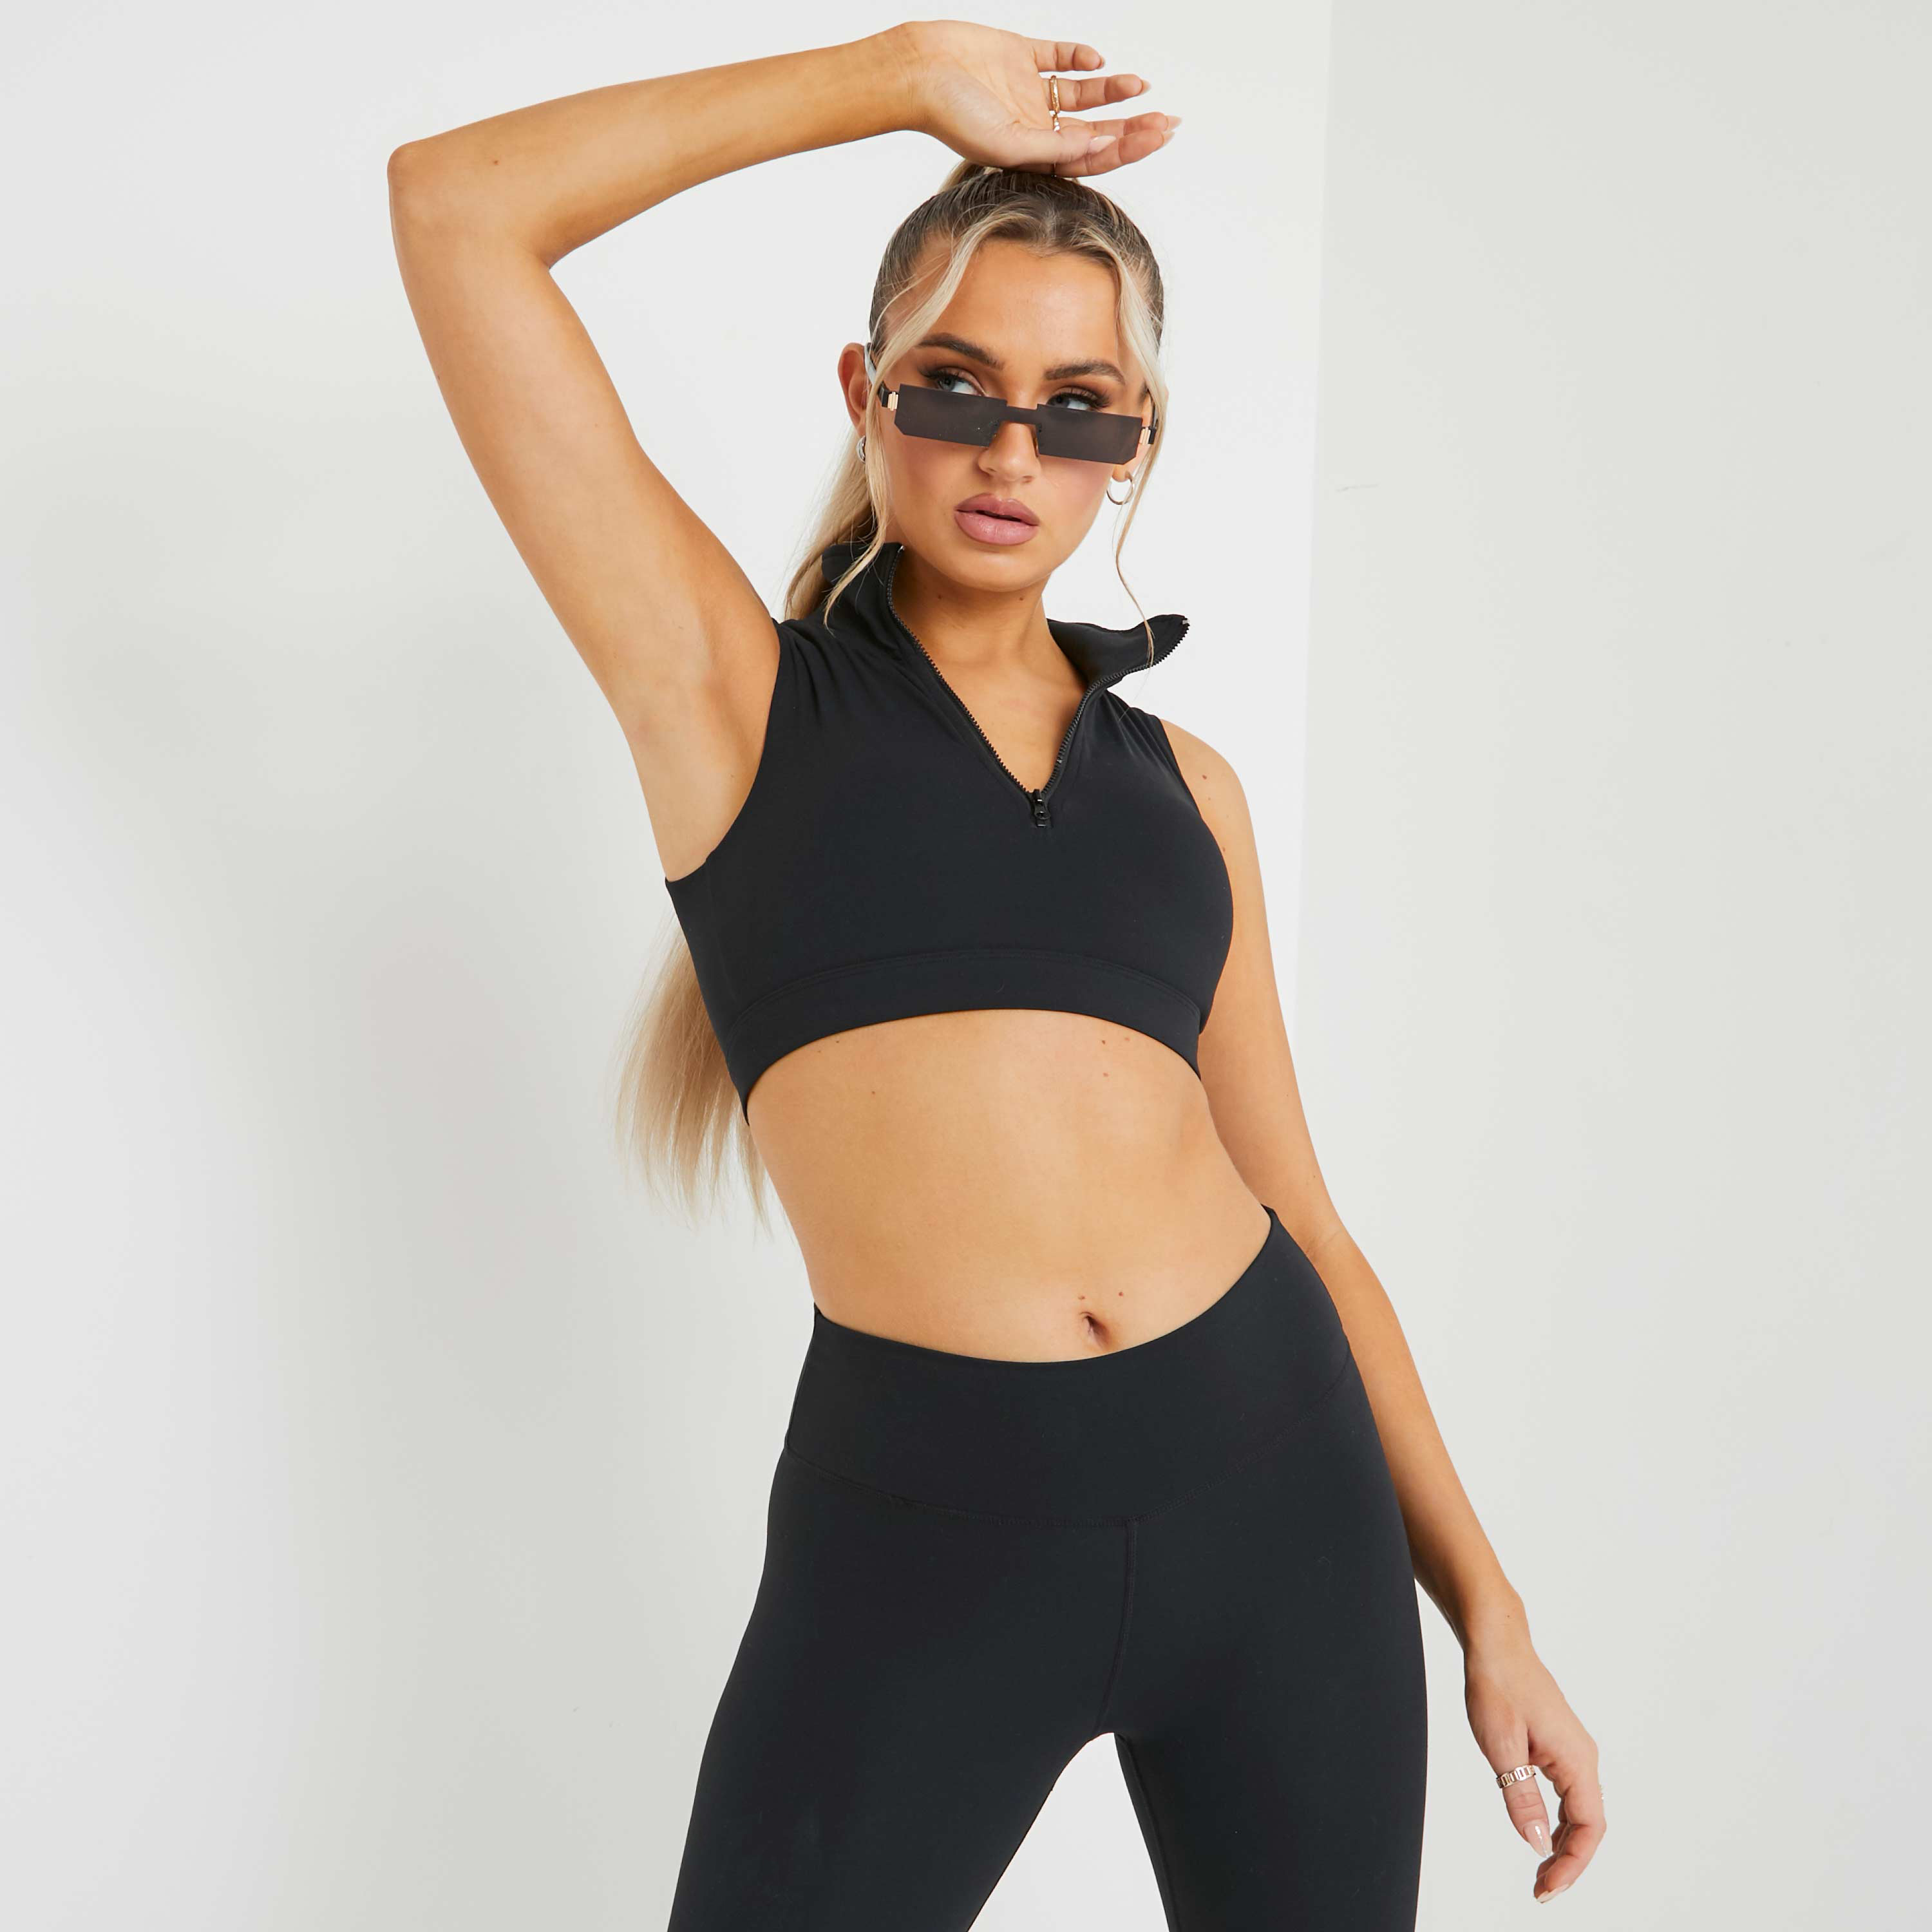 High Neck Zip Up Sleeveless Cropped Gym Top In Black UK Small S, Black